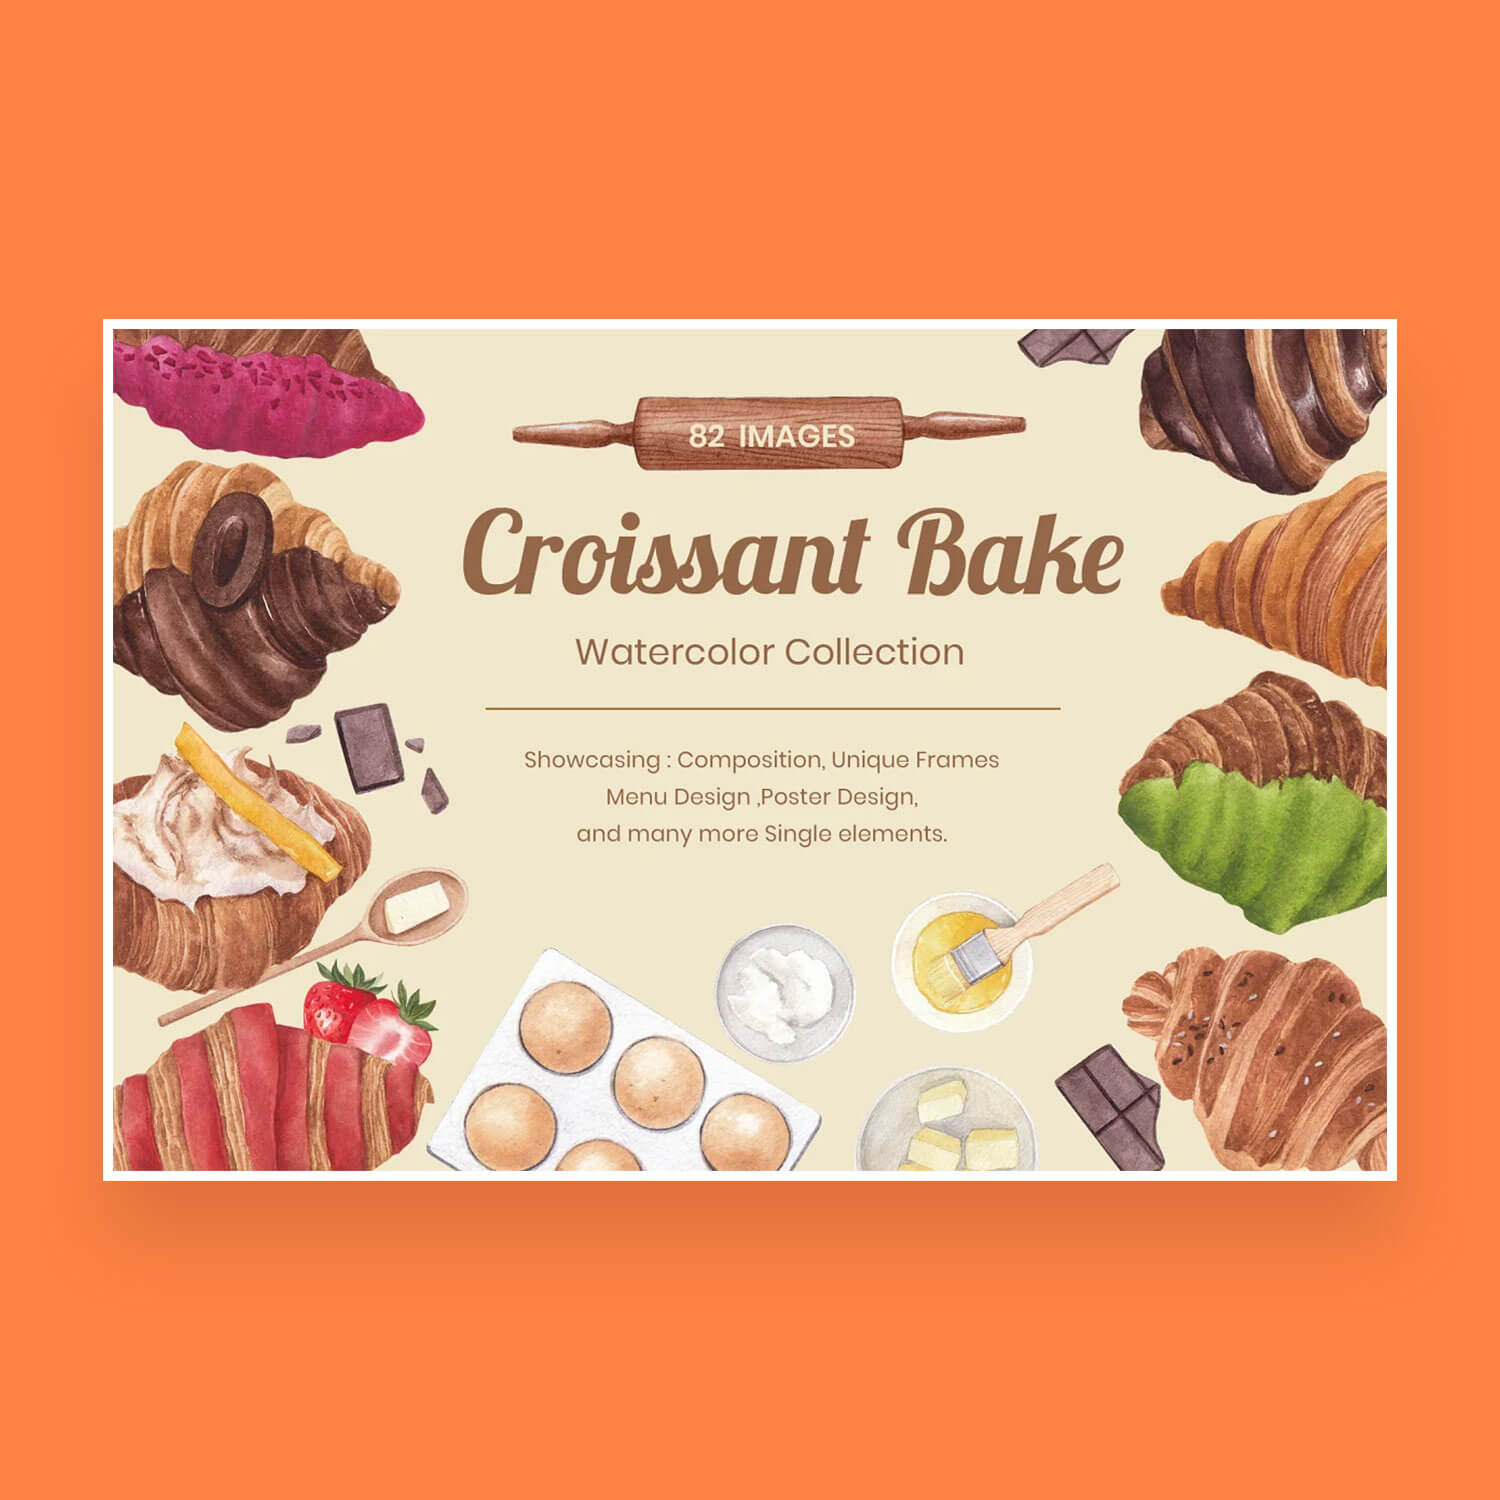 82 Images Croissant Bake Watercolor Collection.